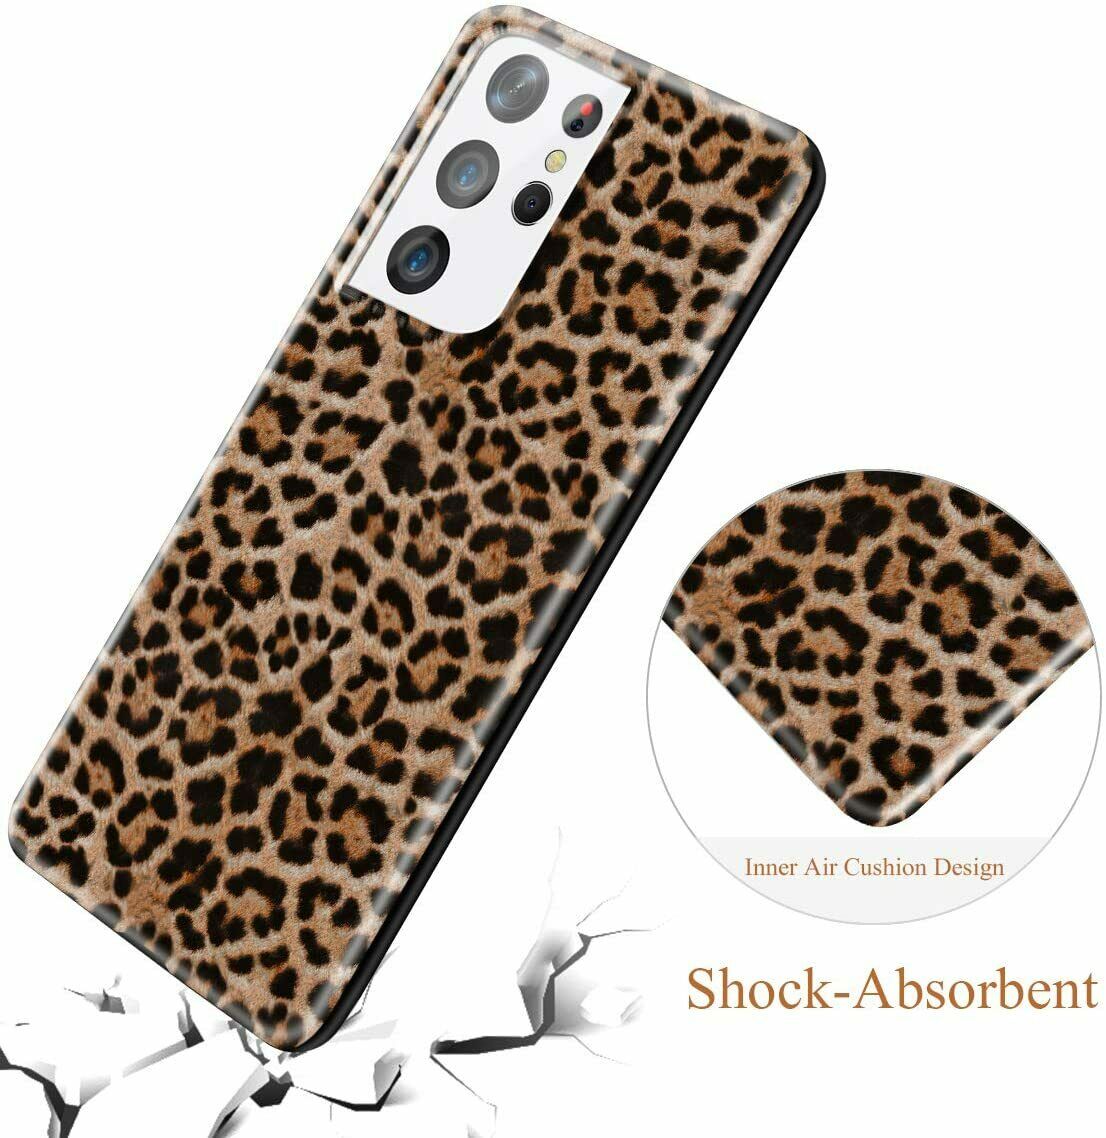 Rubber Case Brown Leopard for Samsung Galaxy S21 + Ultra 5G